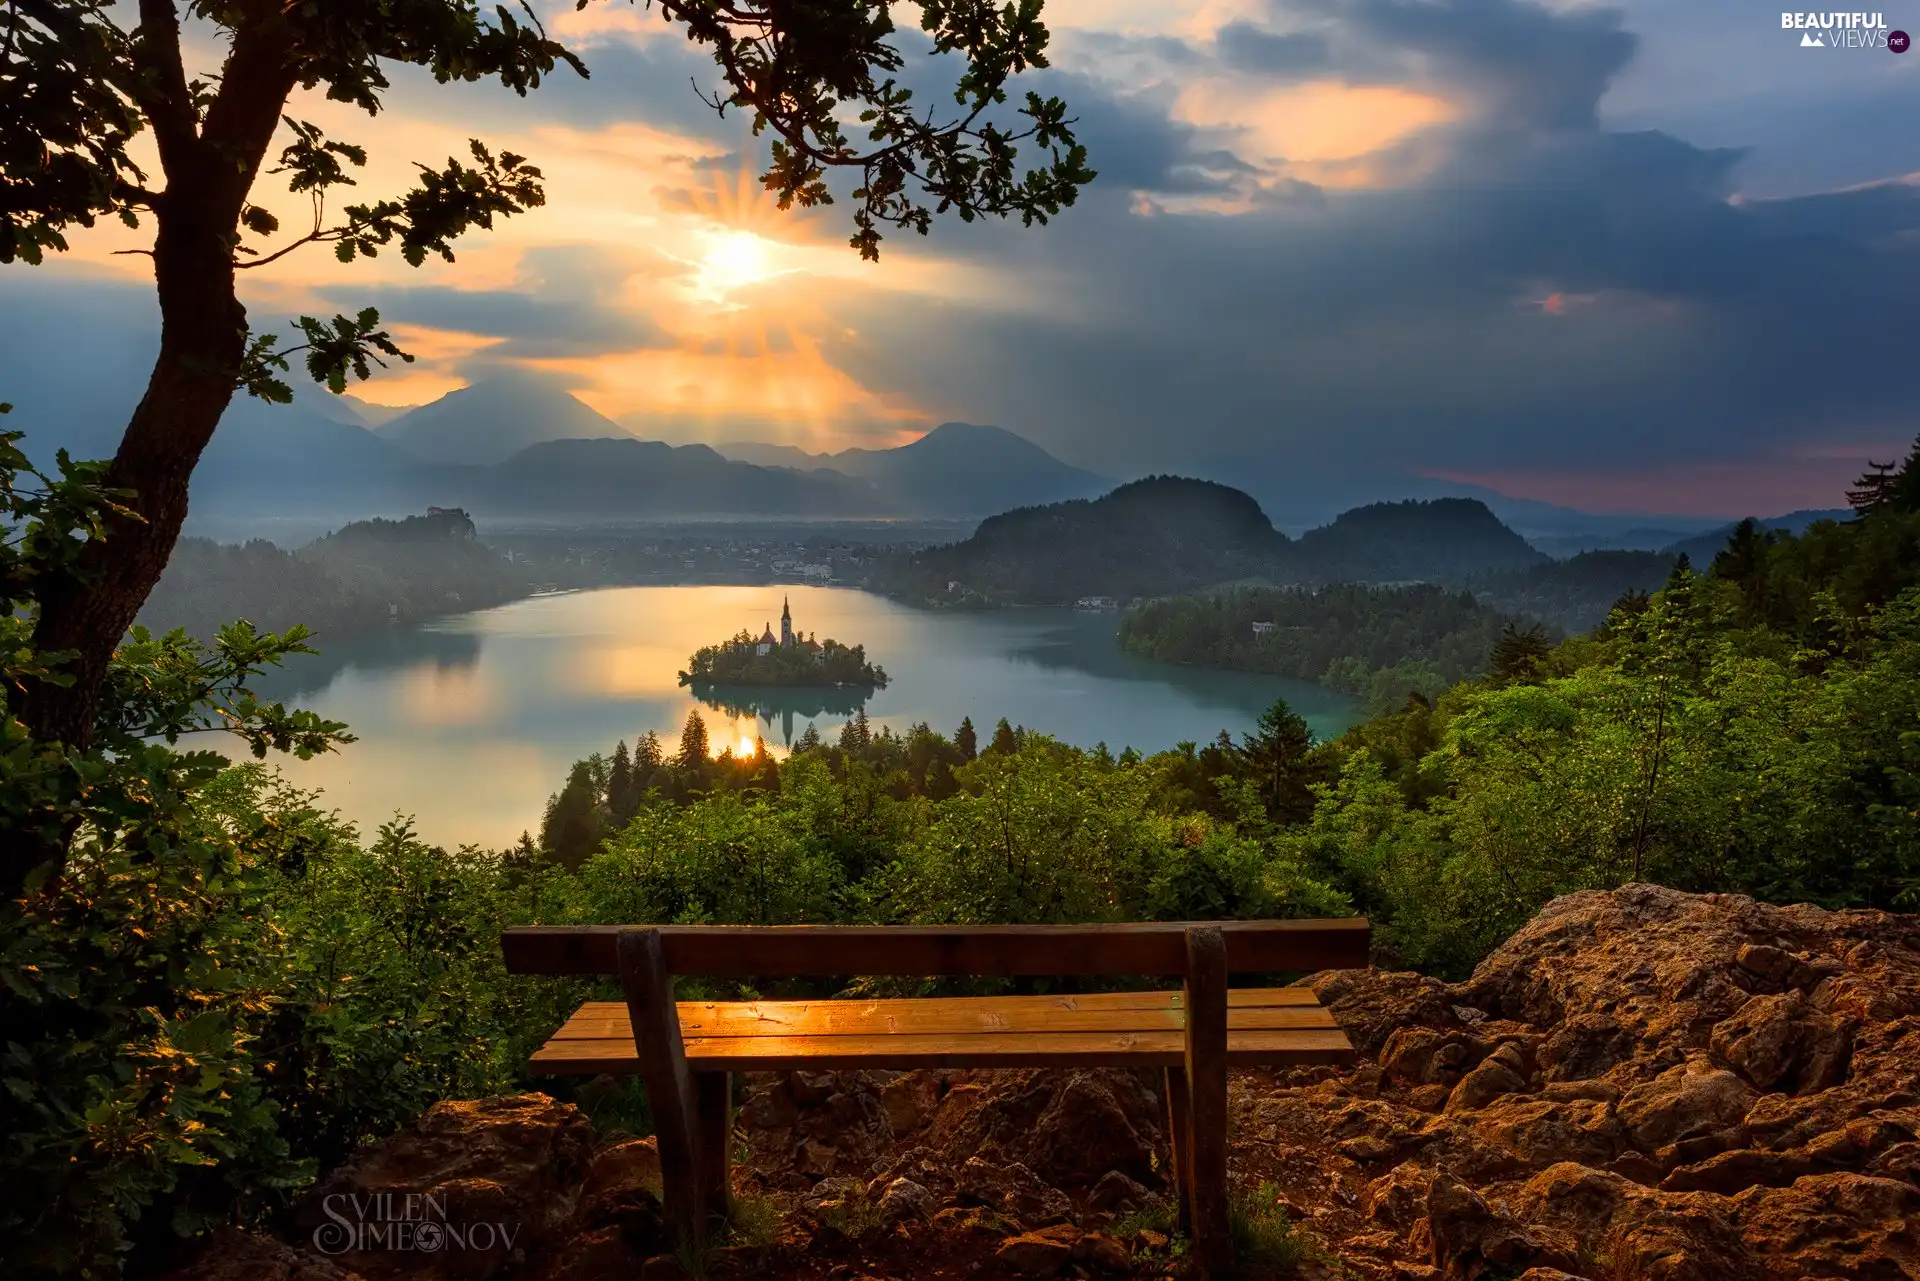 Bled Island, Slovenia, Julian Alps Mountains, Lake Bled, trees, viewes, Great Sunsets, clouds, Bench